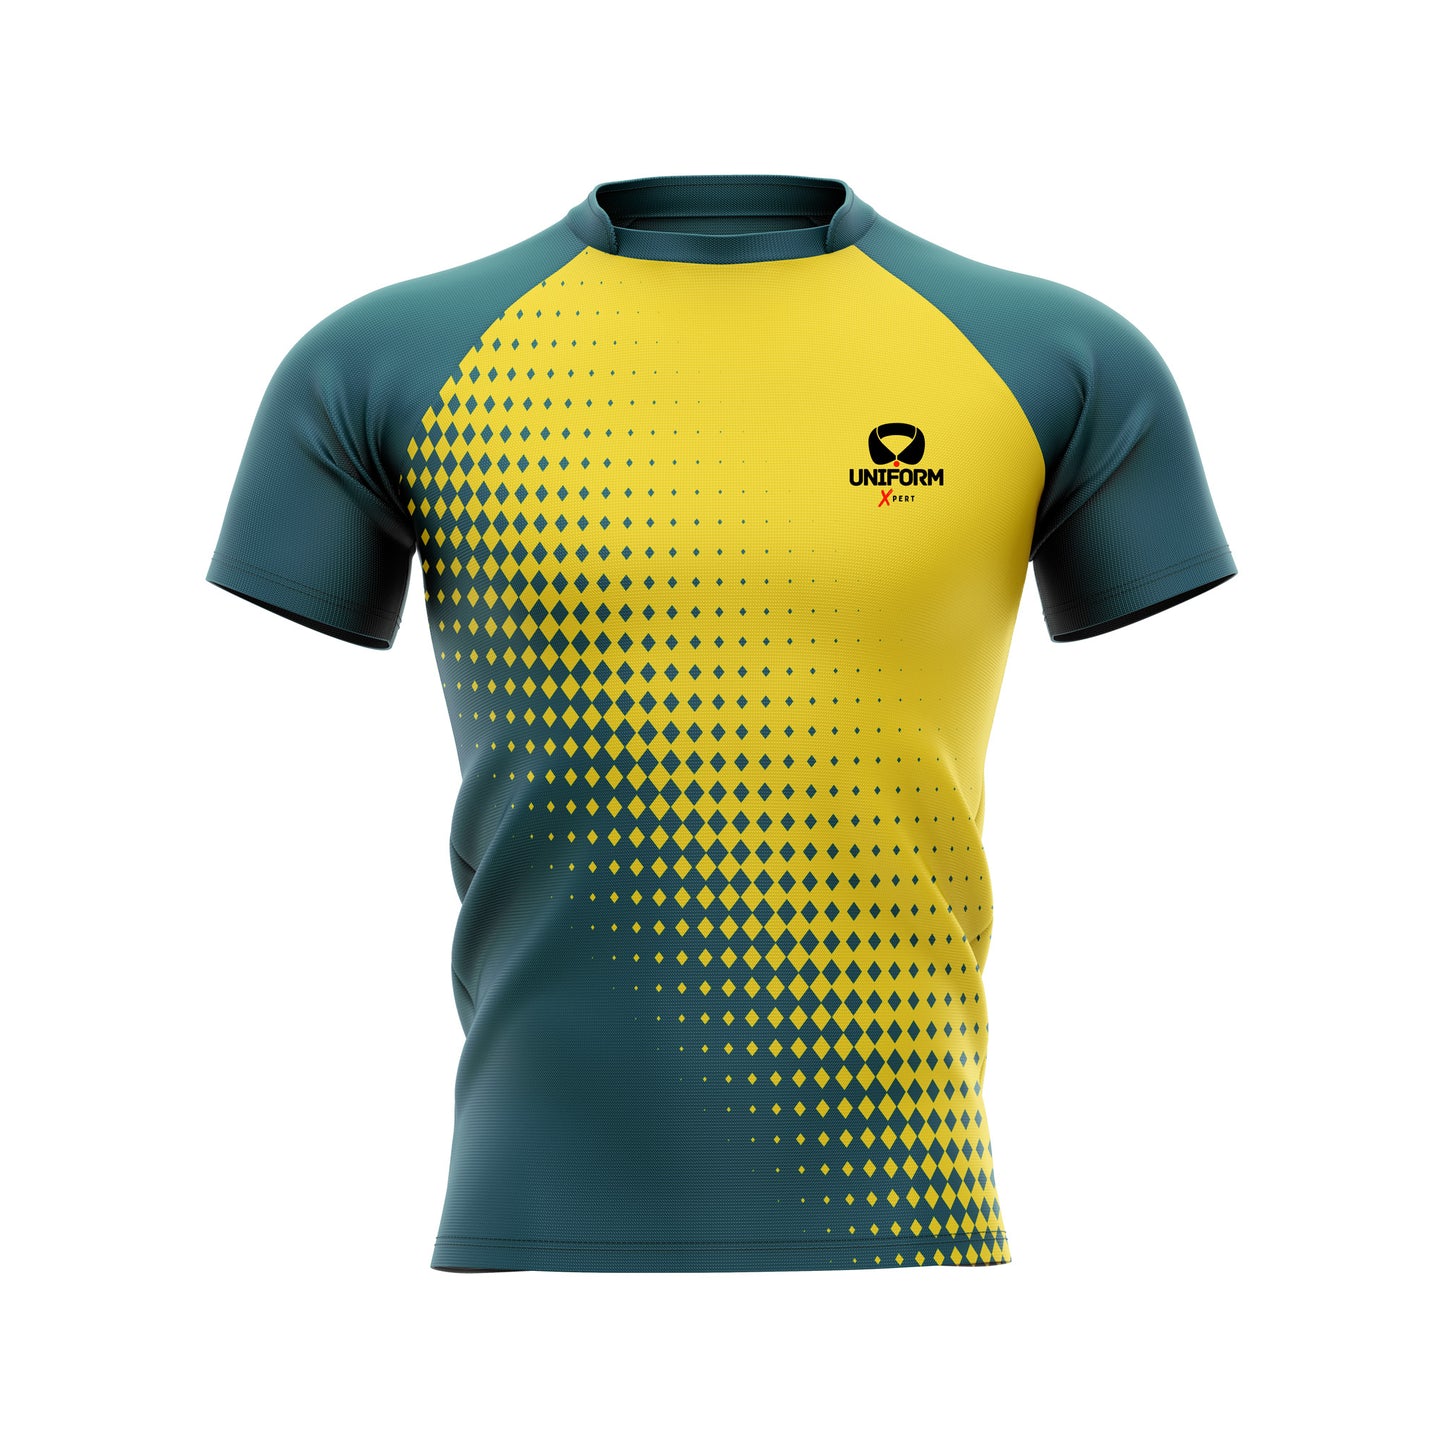 Custom Rugby Jerseys for Teams | Personalized Rugby Shirts